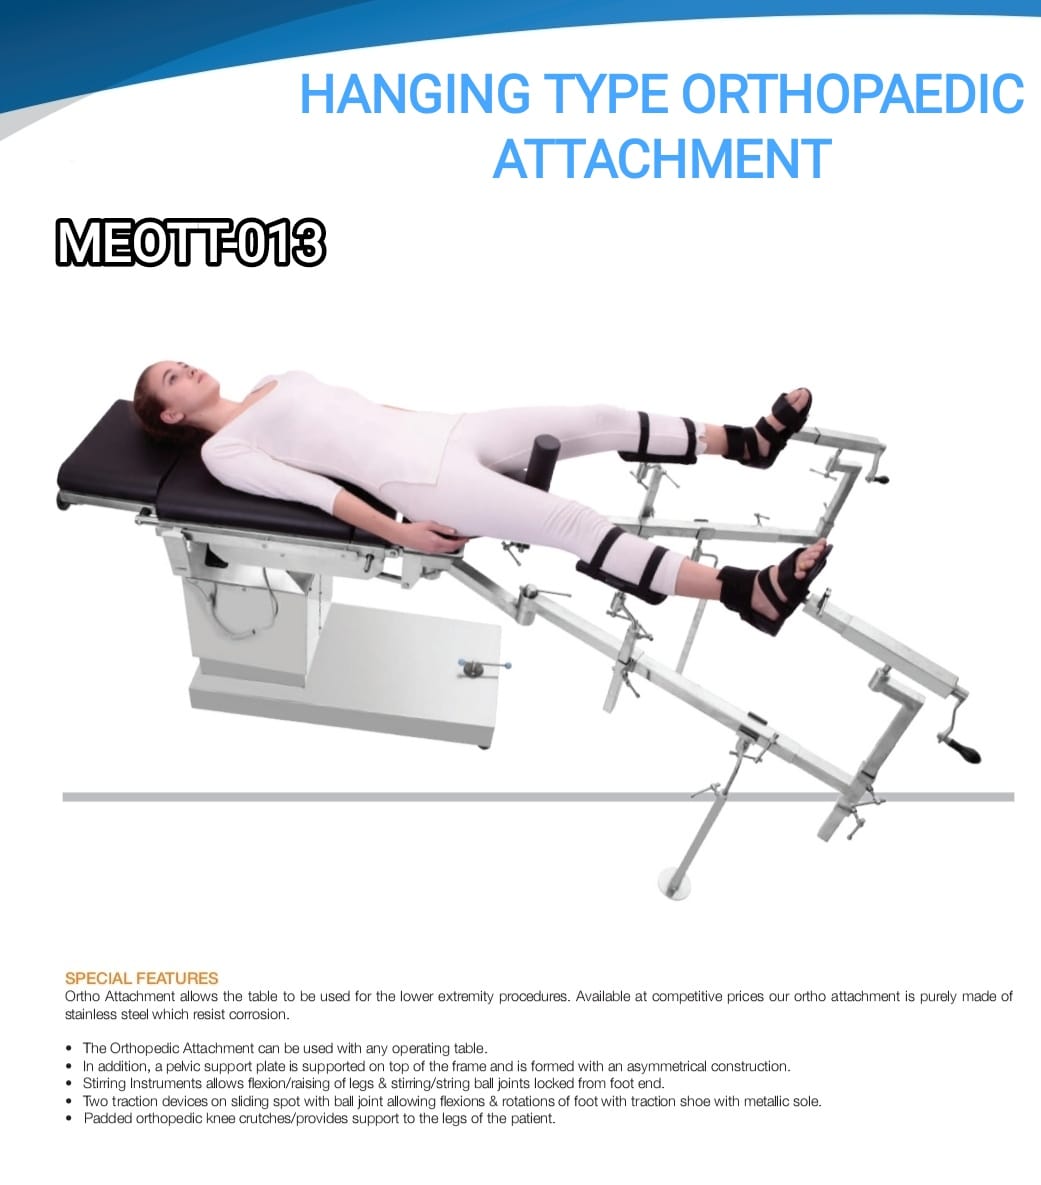 HANGING TYPE ORTHOPEDIC ATTACHMENT